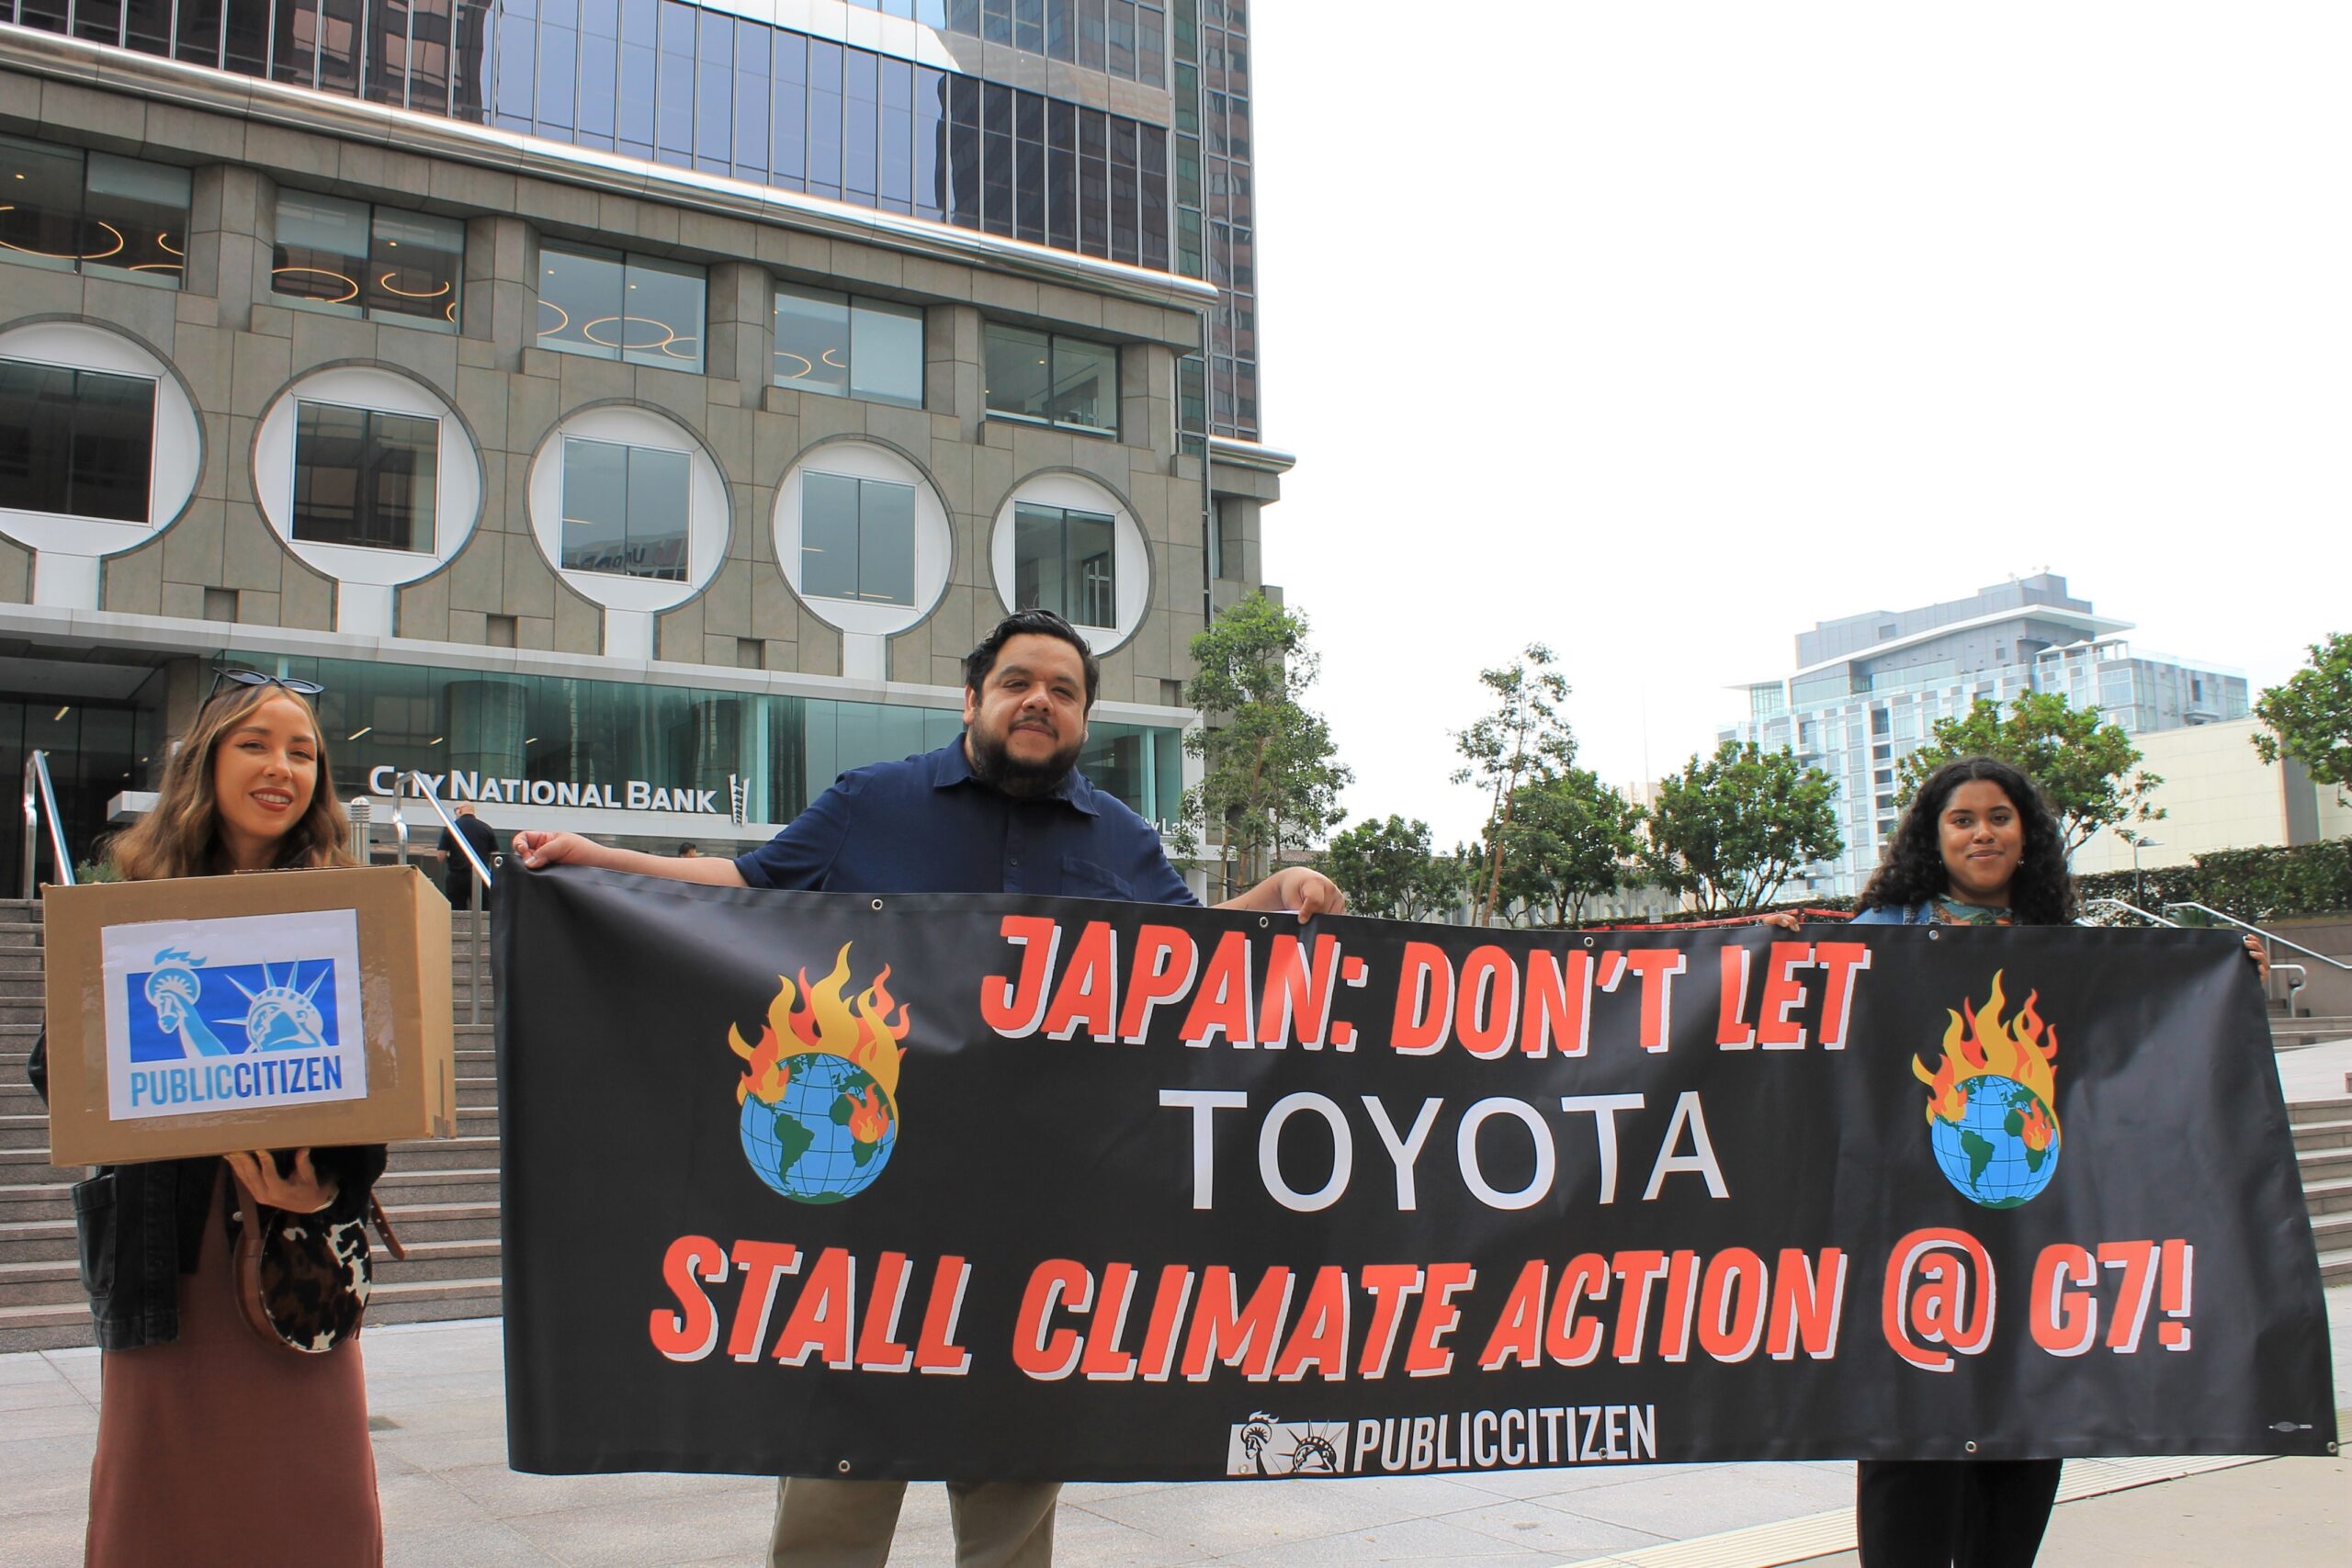 2 Public Citizen staff and 1 ally hold a banner saying, "Japan: don't let Toyota stall climate action @G7!"